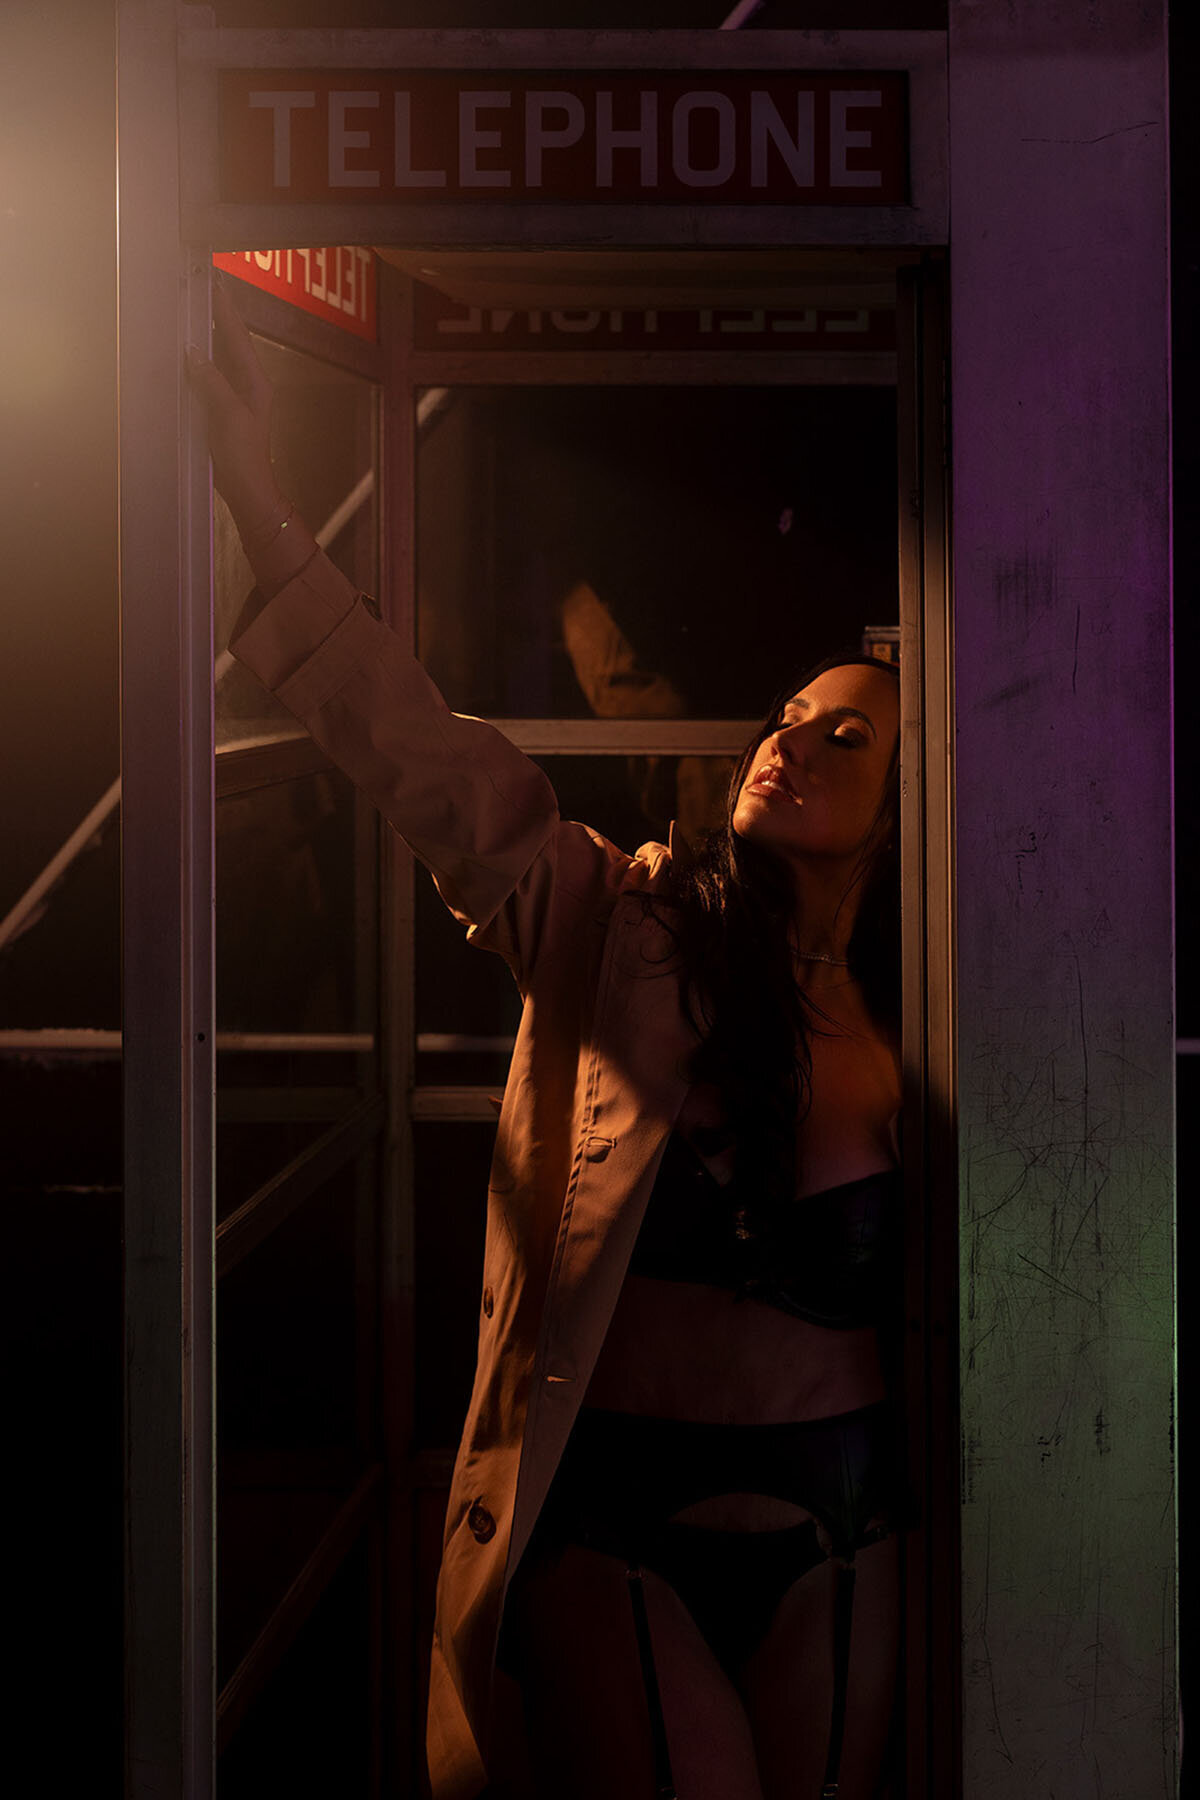 Darkly lit artistic boudoir portrait of woman in phone booth